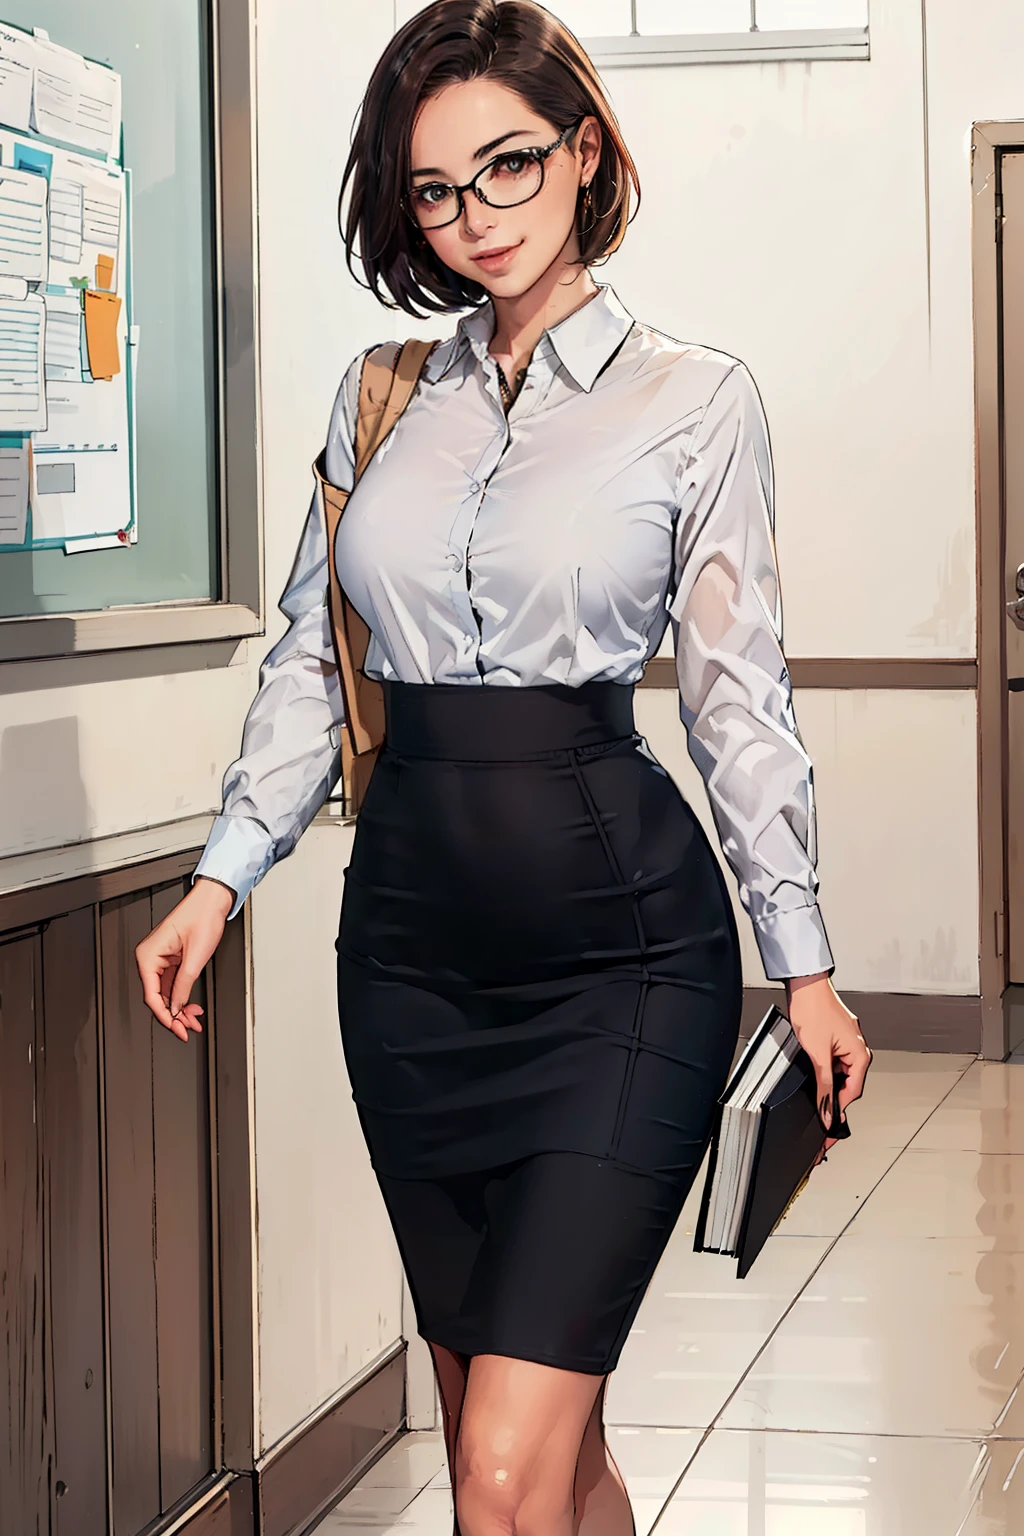 ((Realistic Light, Best Quality, 8K, Masterpiece: 1.3)), 1girl, female teacher, Slim Beauty: 1.4, (Brown hair,  short hair length to shoulder, glasses, large breasts: 1.3), wearing long sleeve white shirt(( appropriate shirt)), black pencil skirt((length skirt to the knee)), walking alone at stair inside school, holding book(( only book)), smile, 